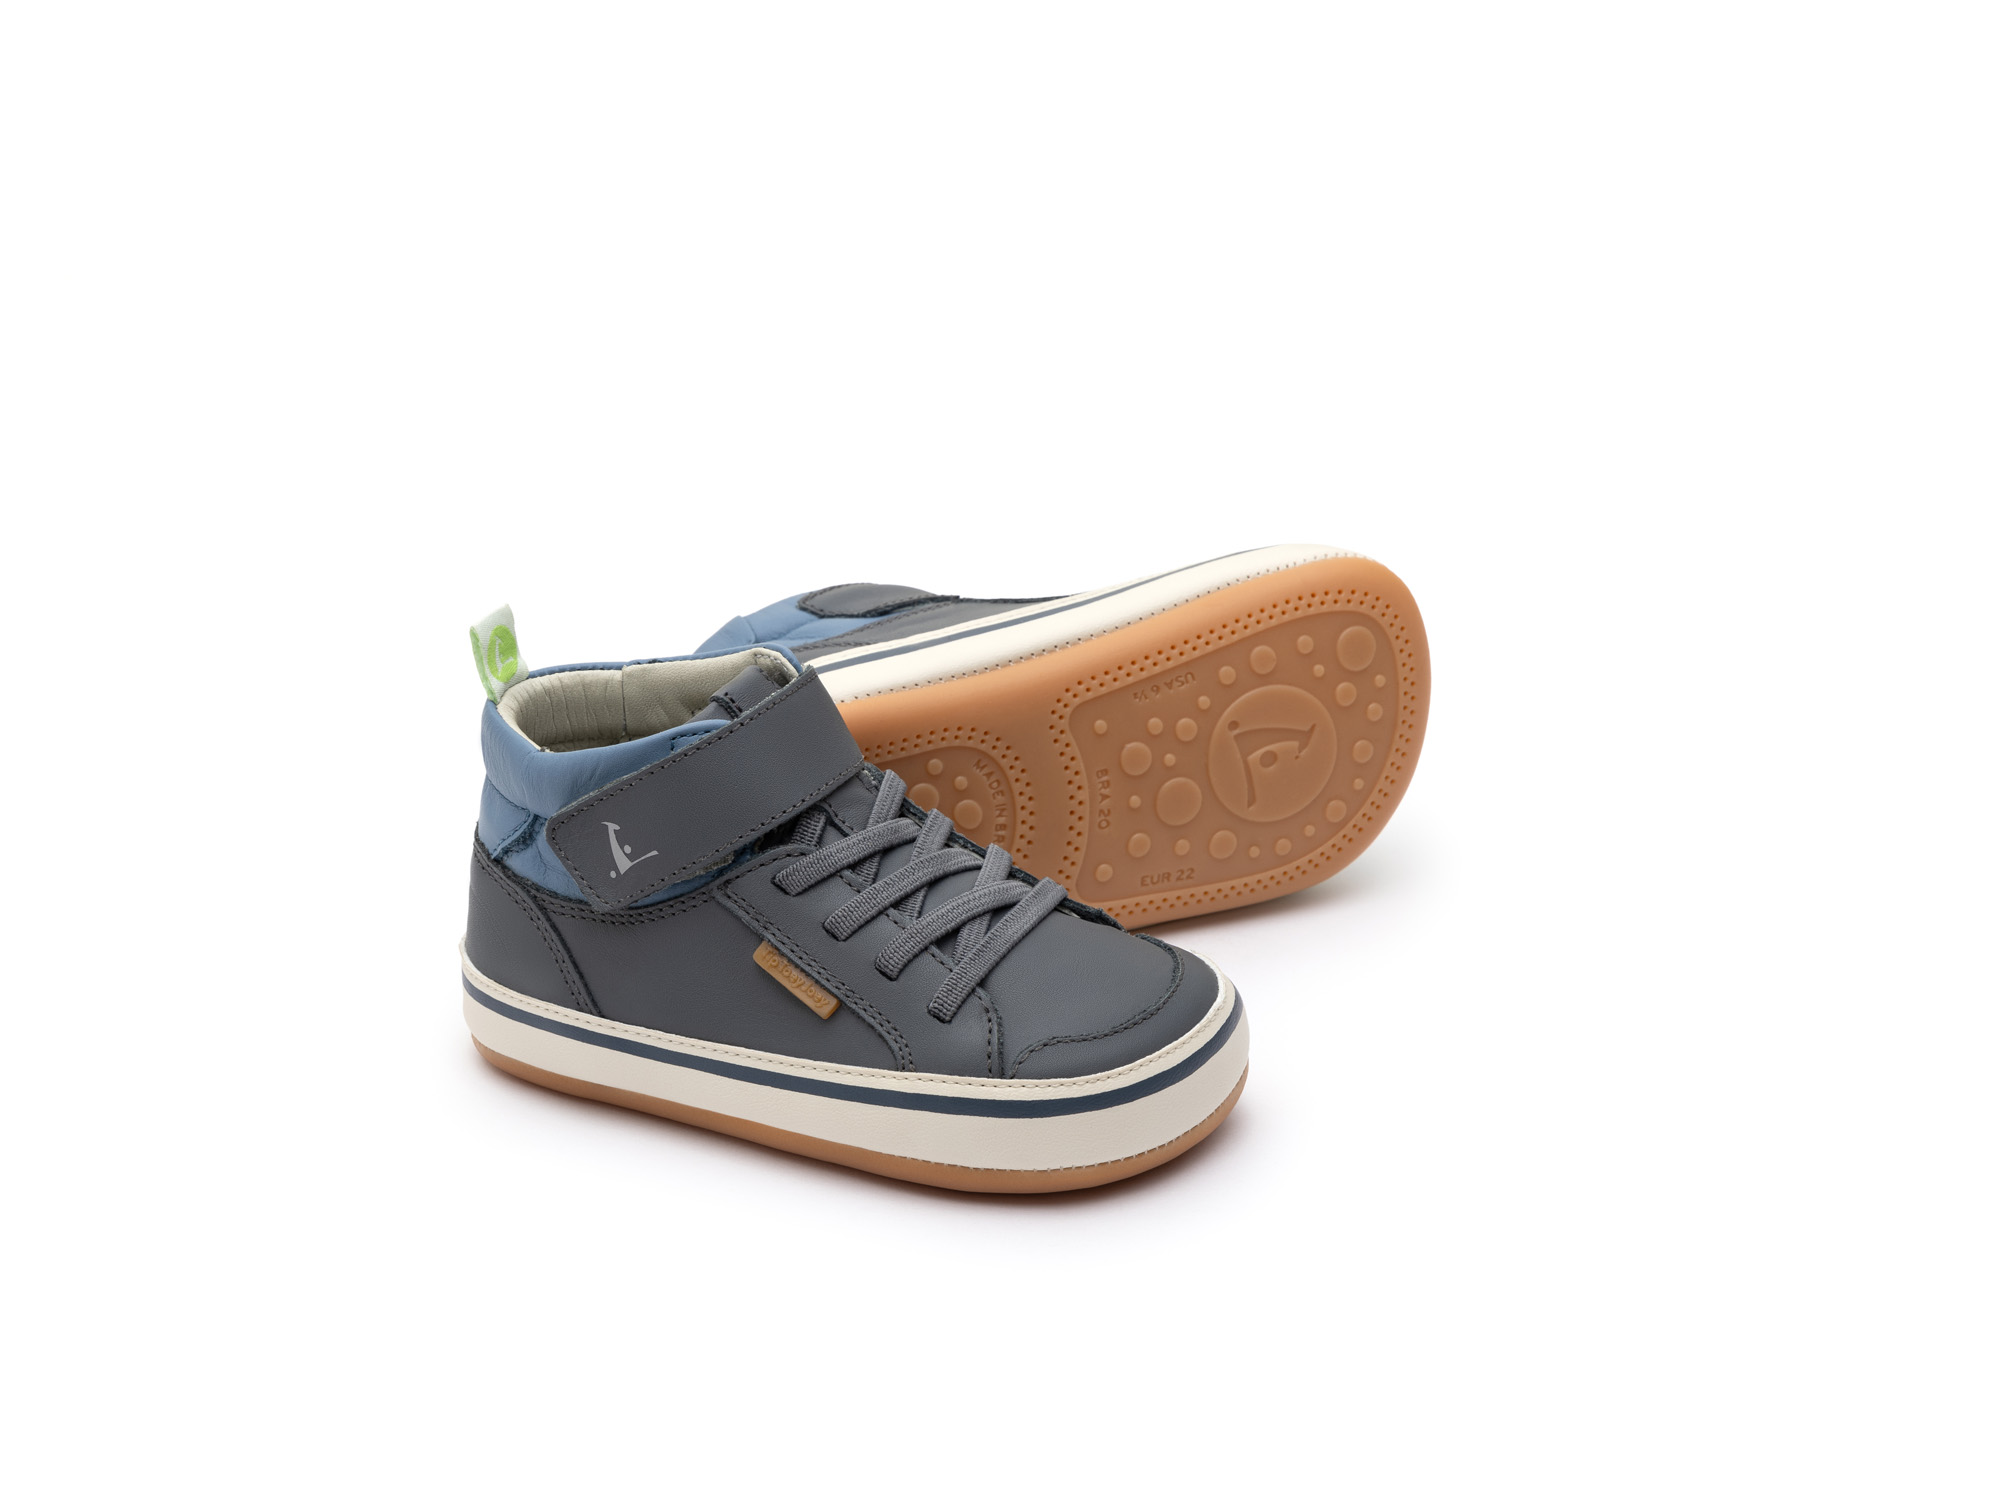 UP & GO Sneakers for Boys Alley | Tip Toey Joey - Australia - 0